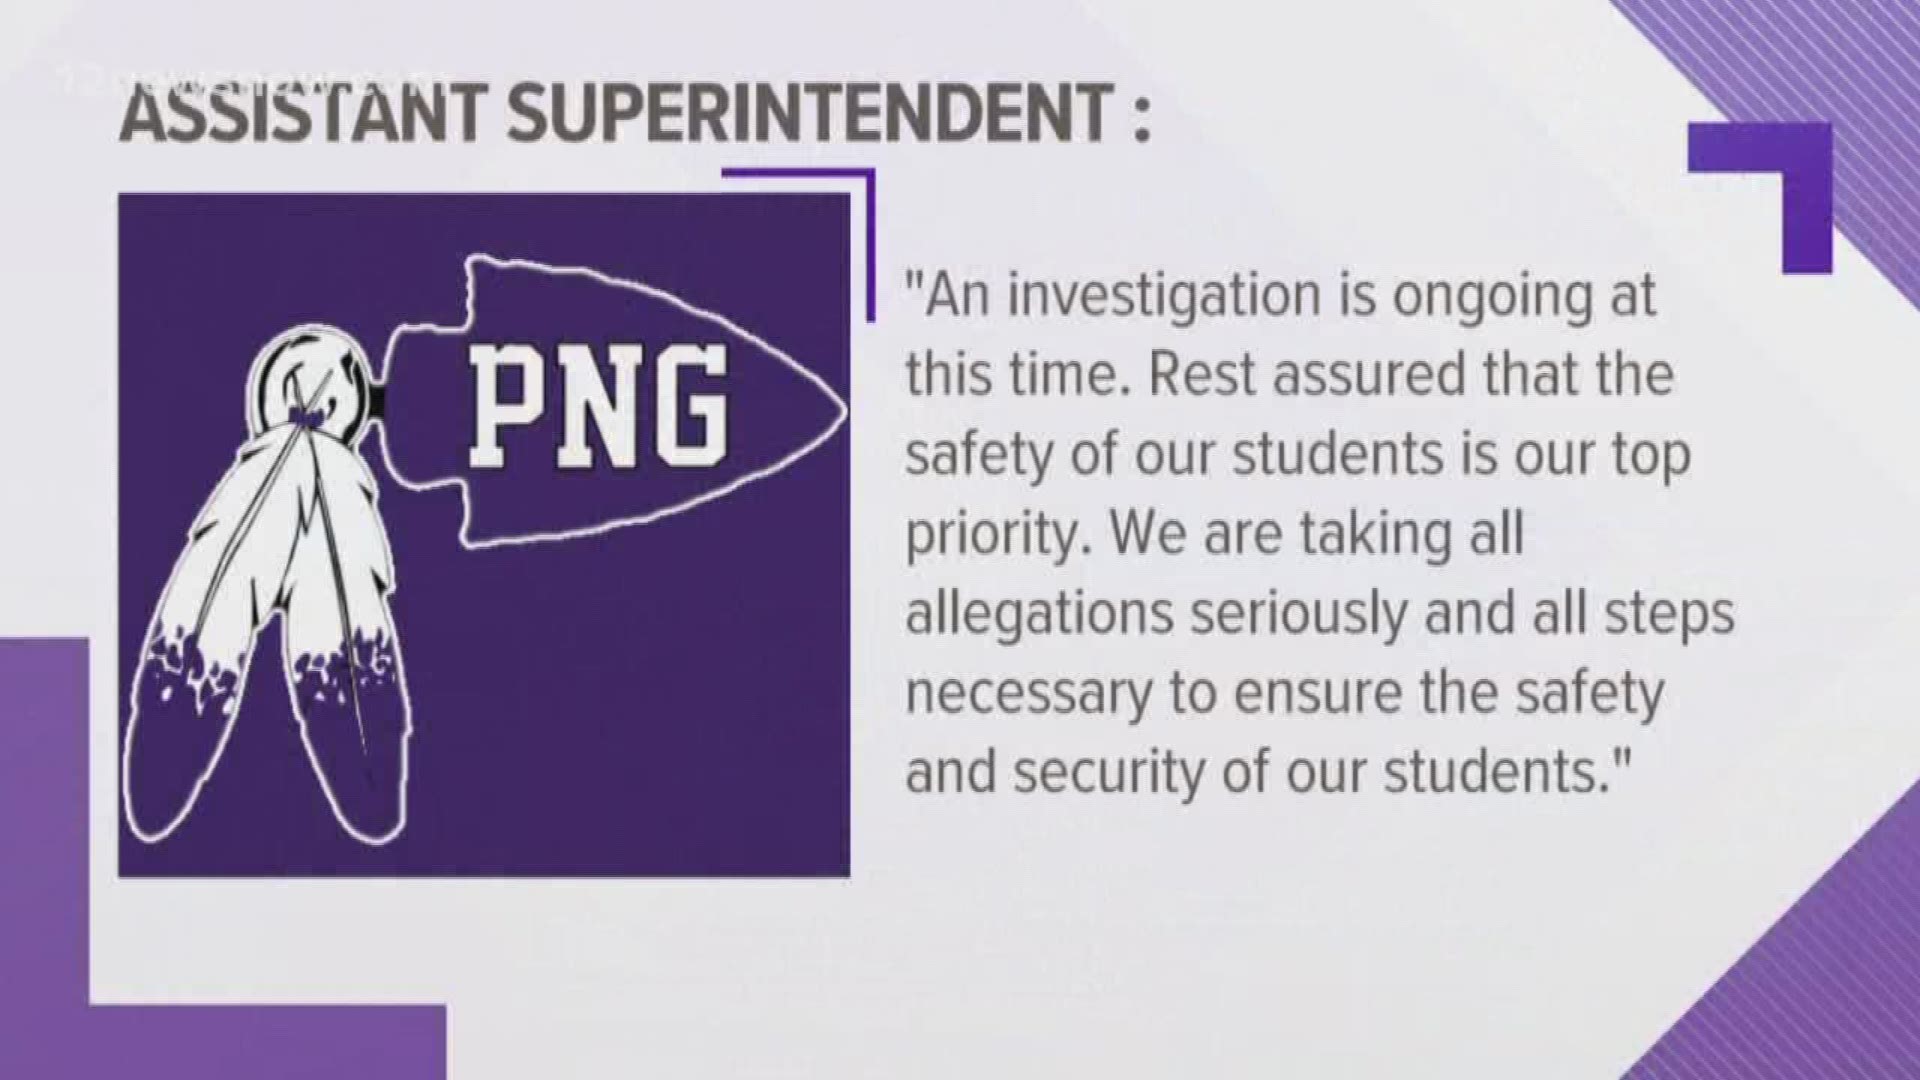 The assistant superintendent said 'we are taking all allegations seriously and all steps necessary to ensure the safety and security of our students.'